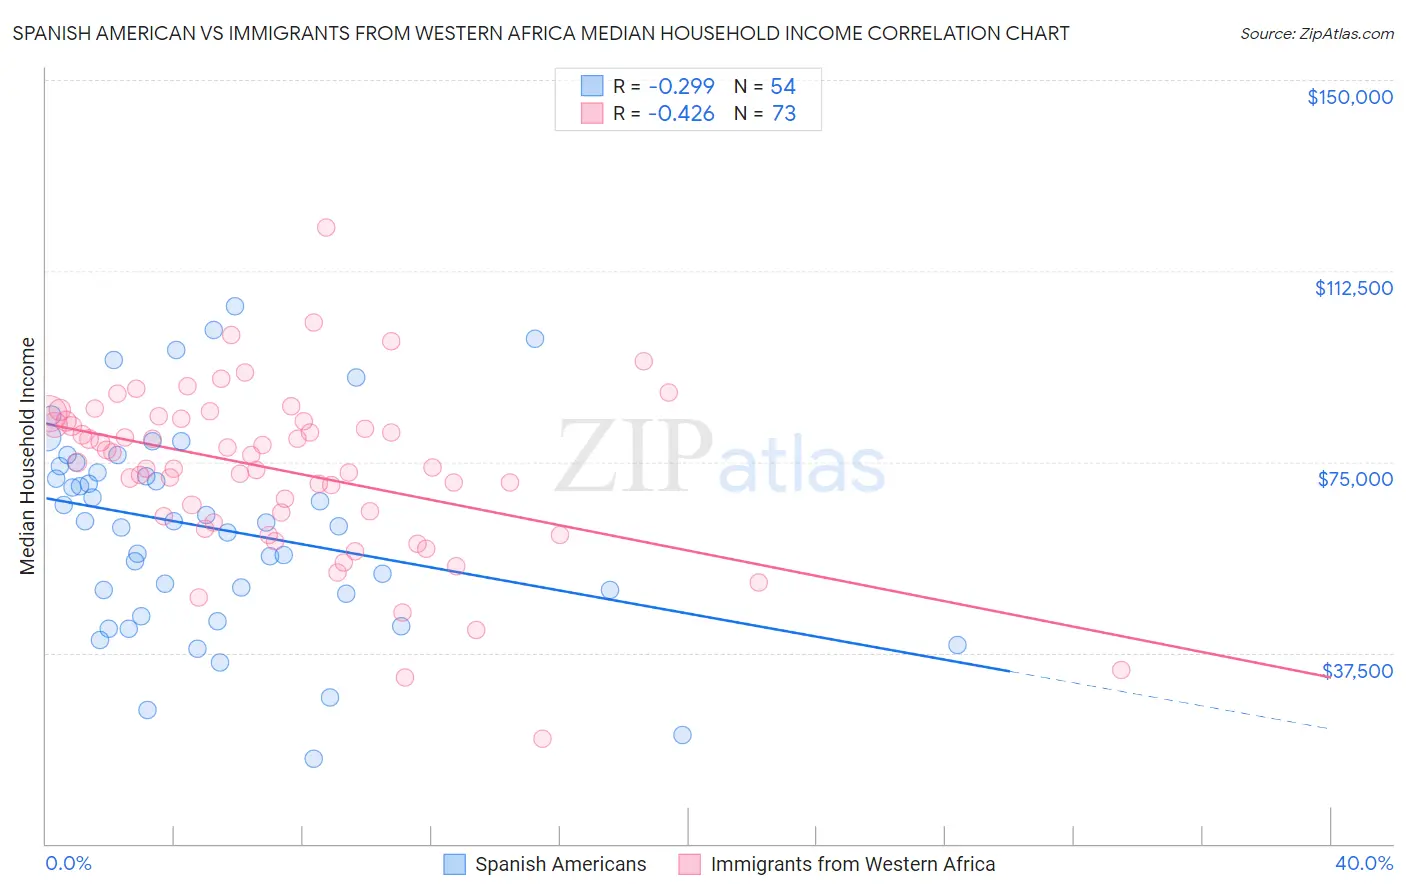 Spanish American vs Immigrants from Western Africa Median Household Income